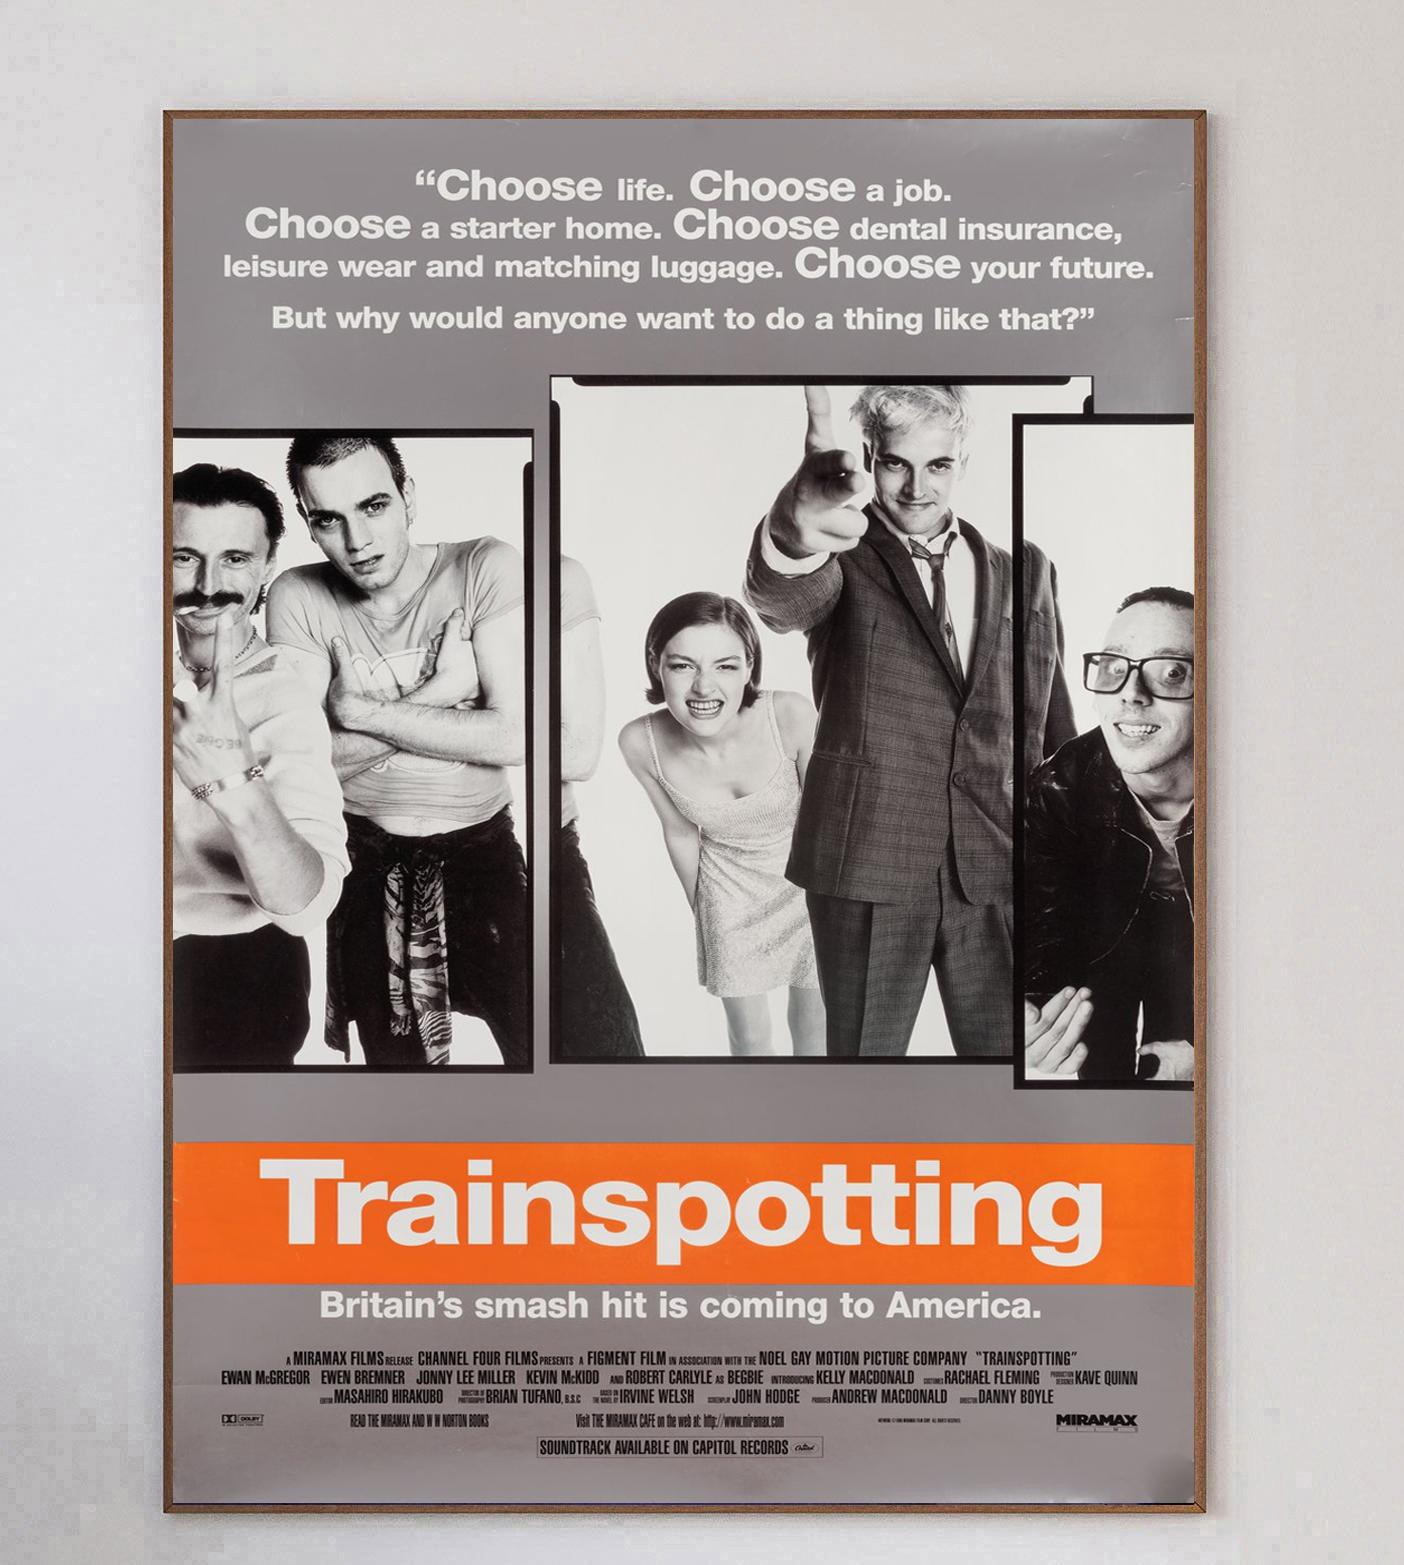 Trainspotting is a 1996 British black comedy crime film directed by Danny Boyle's seminal film 